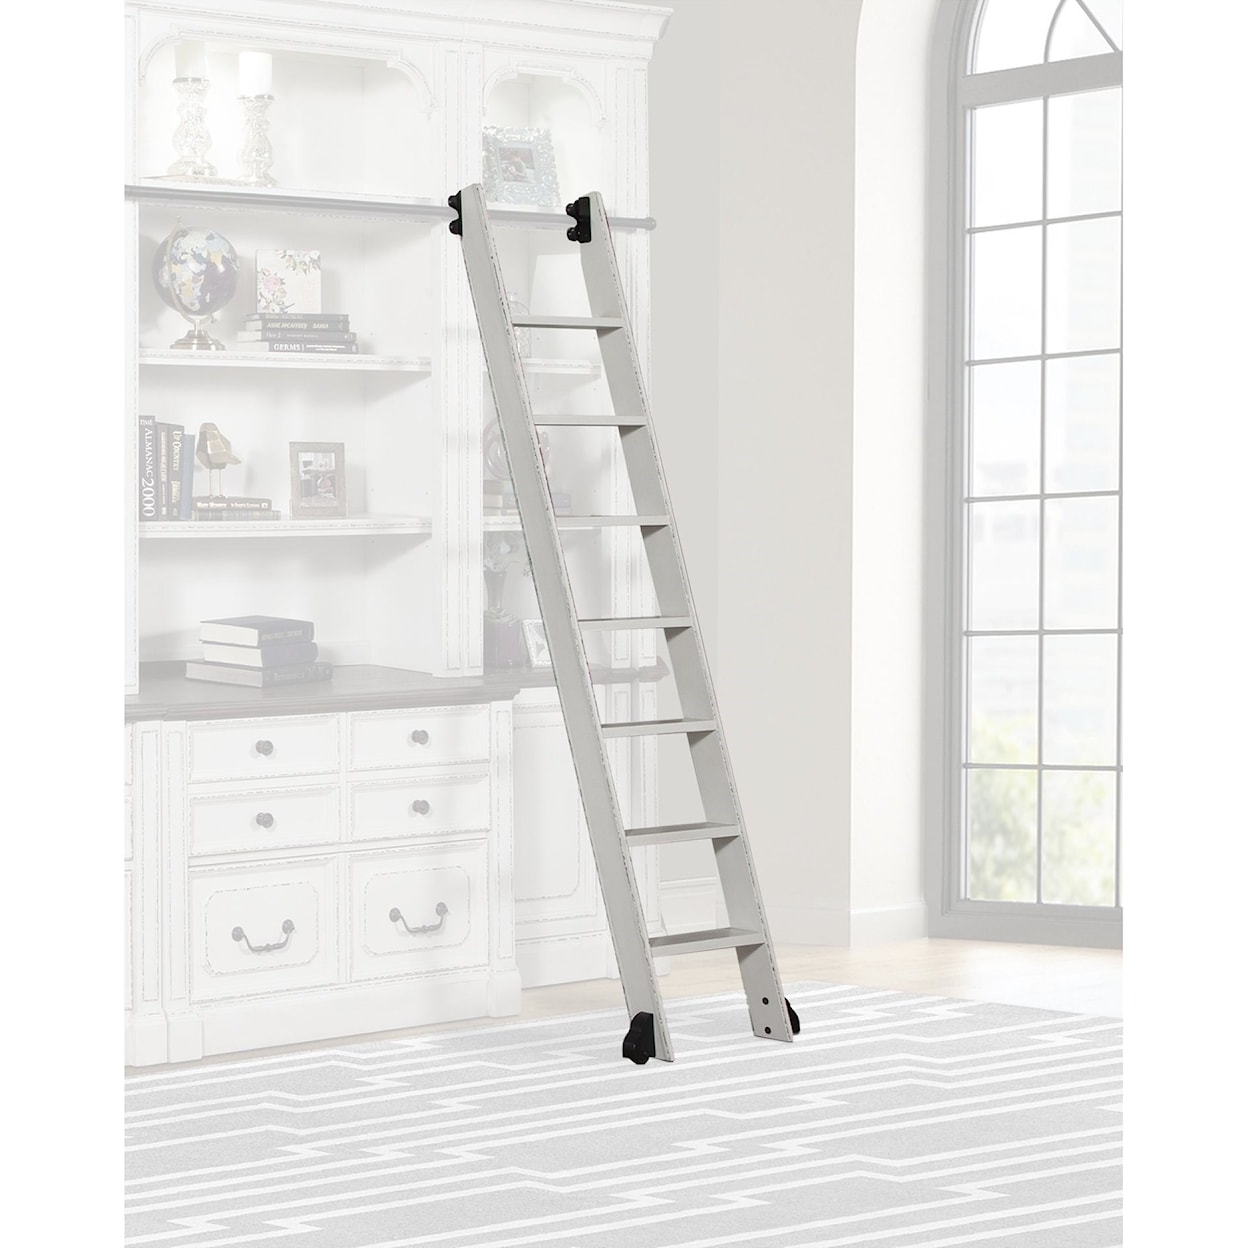 Paramount Furniture Provence Library Ladder -only for use w/ Library Wall